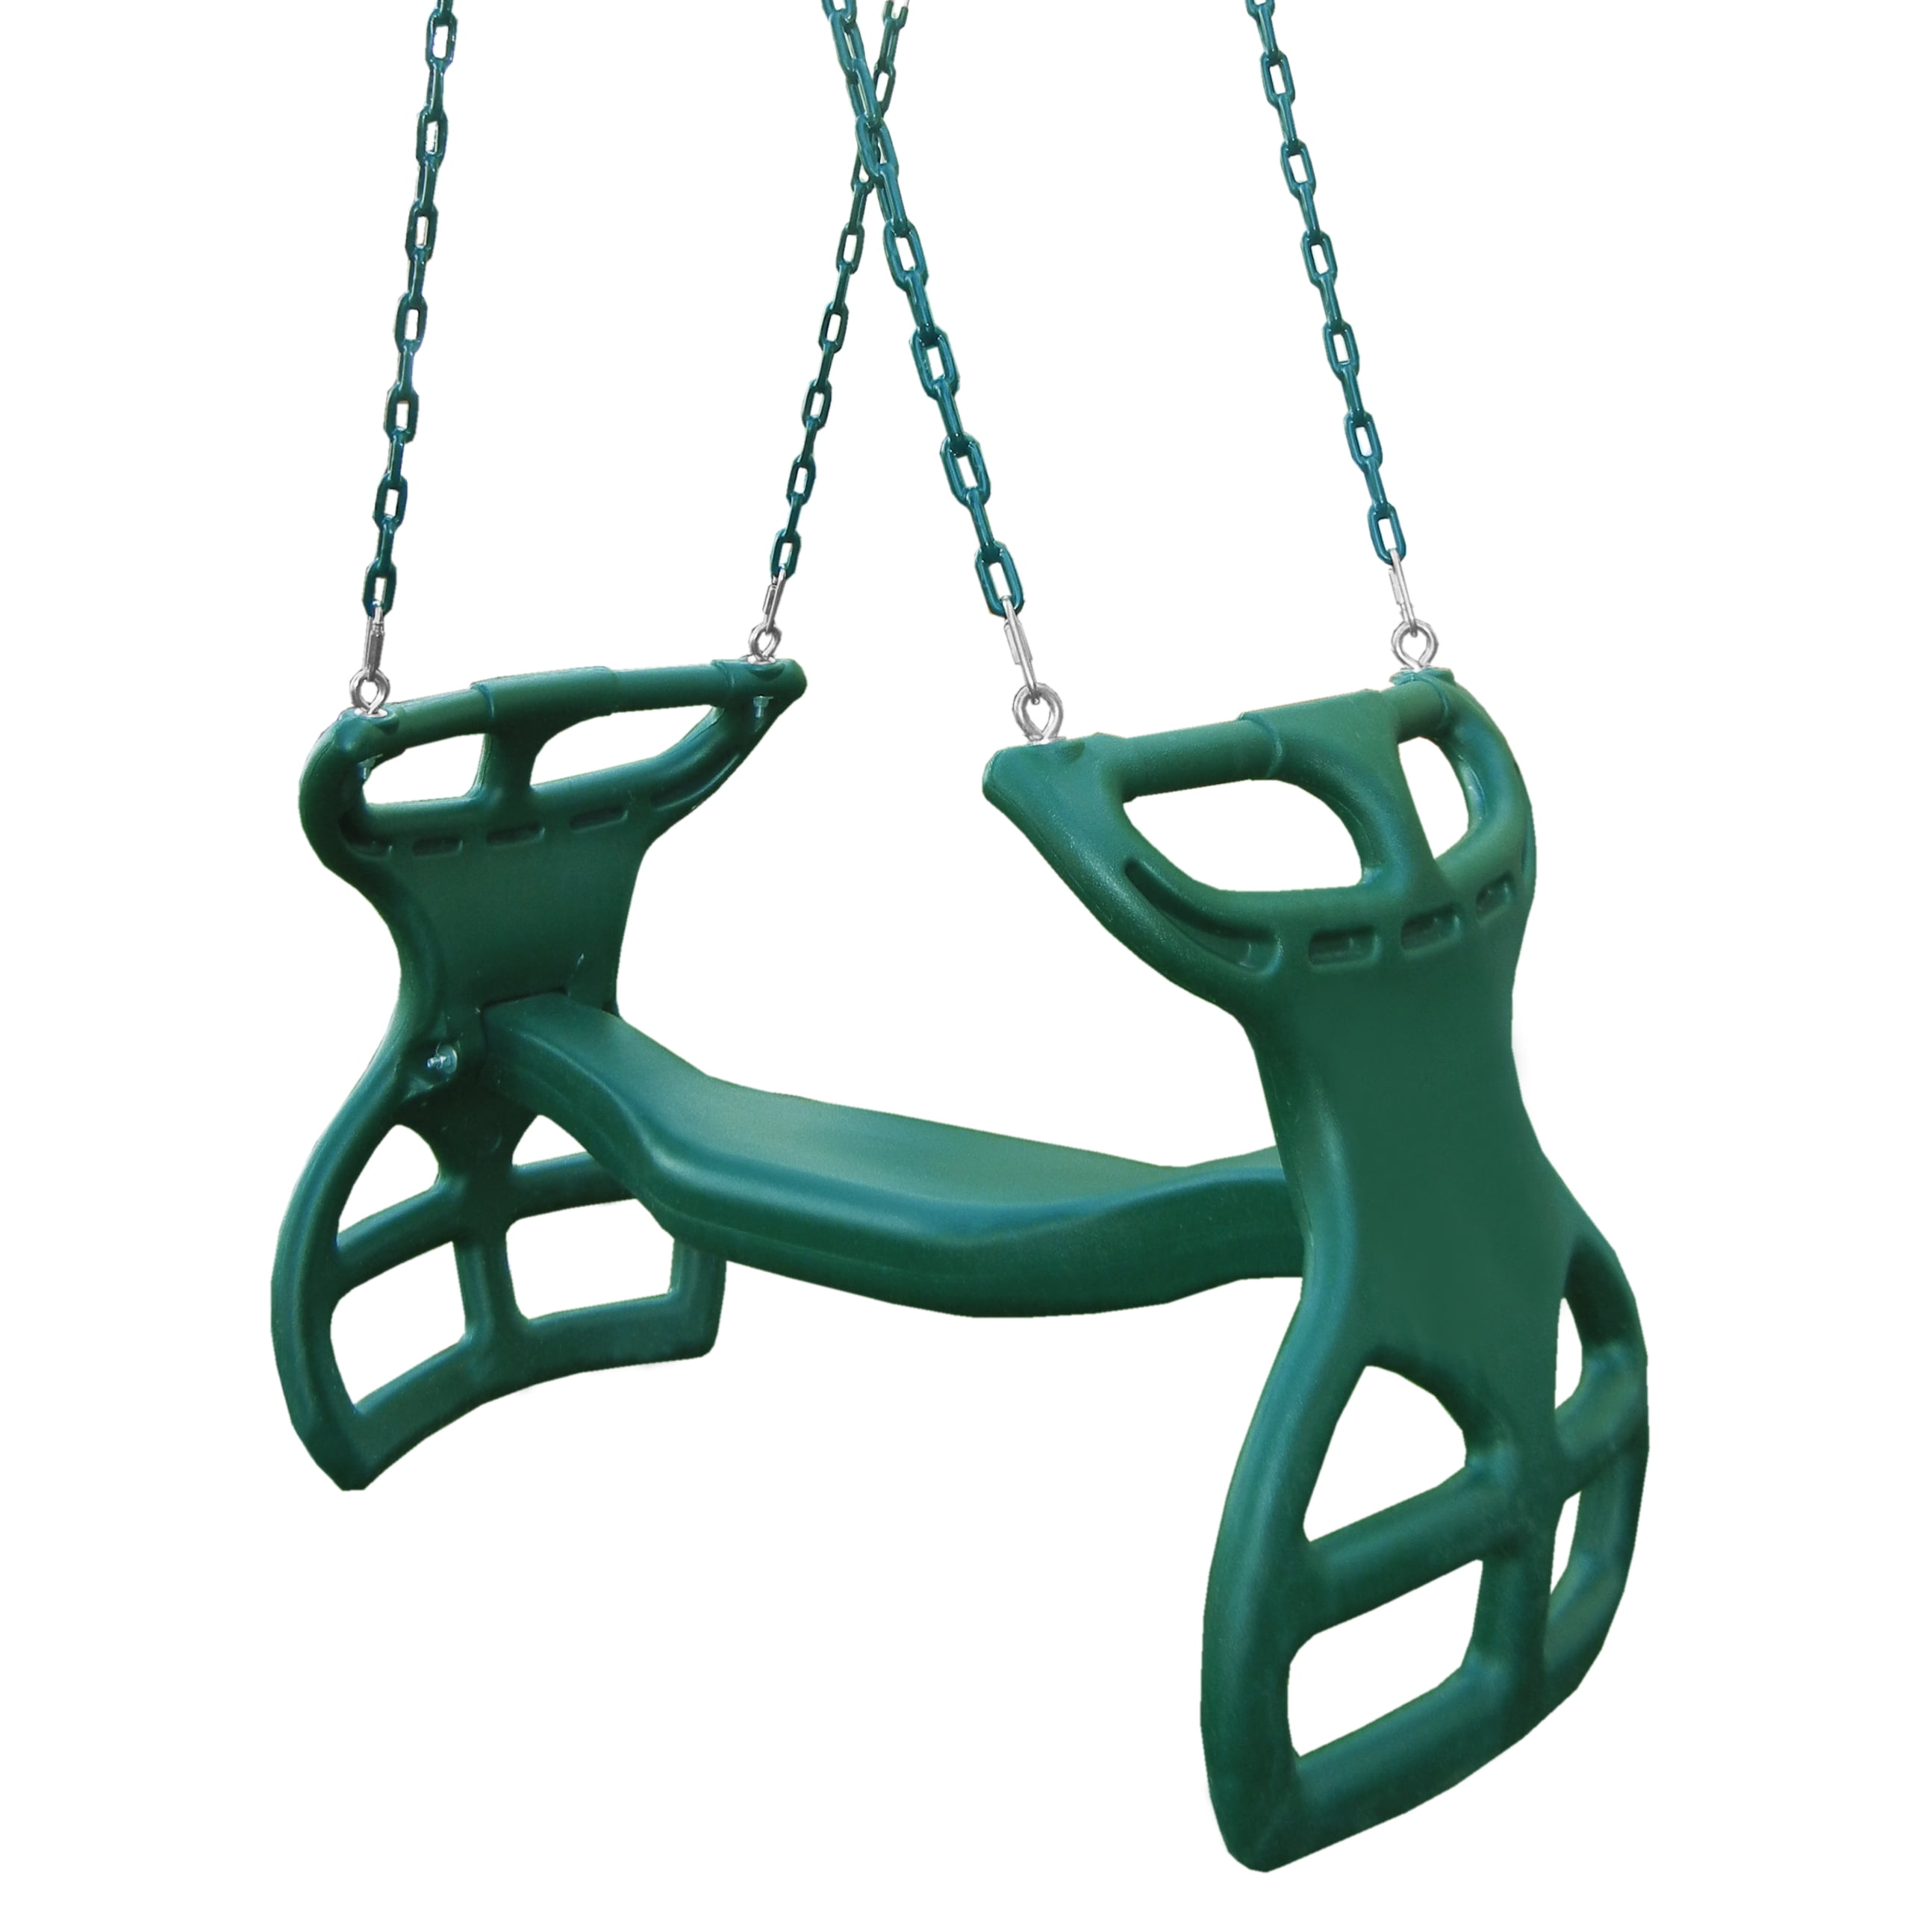 Deluxe Swing Belt with Chain Green Seat Play Set Accessory by Gorilla Playset 